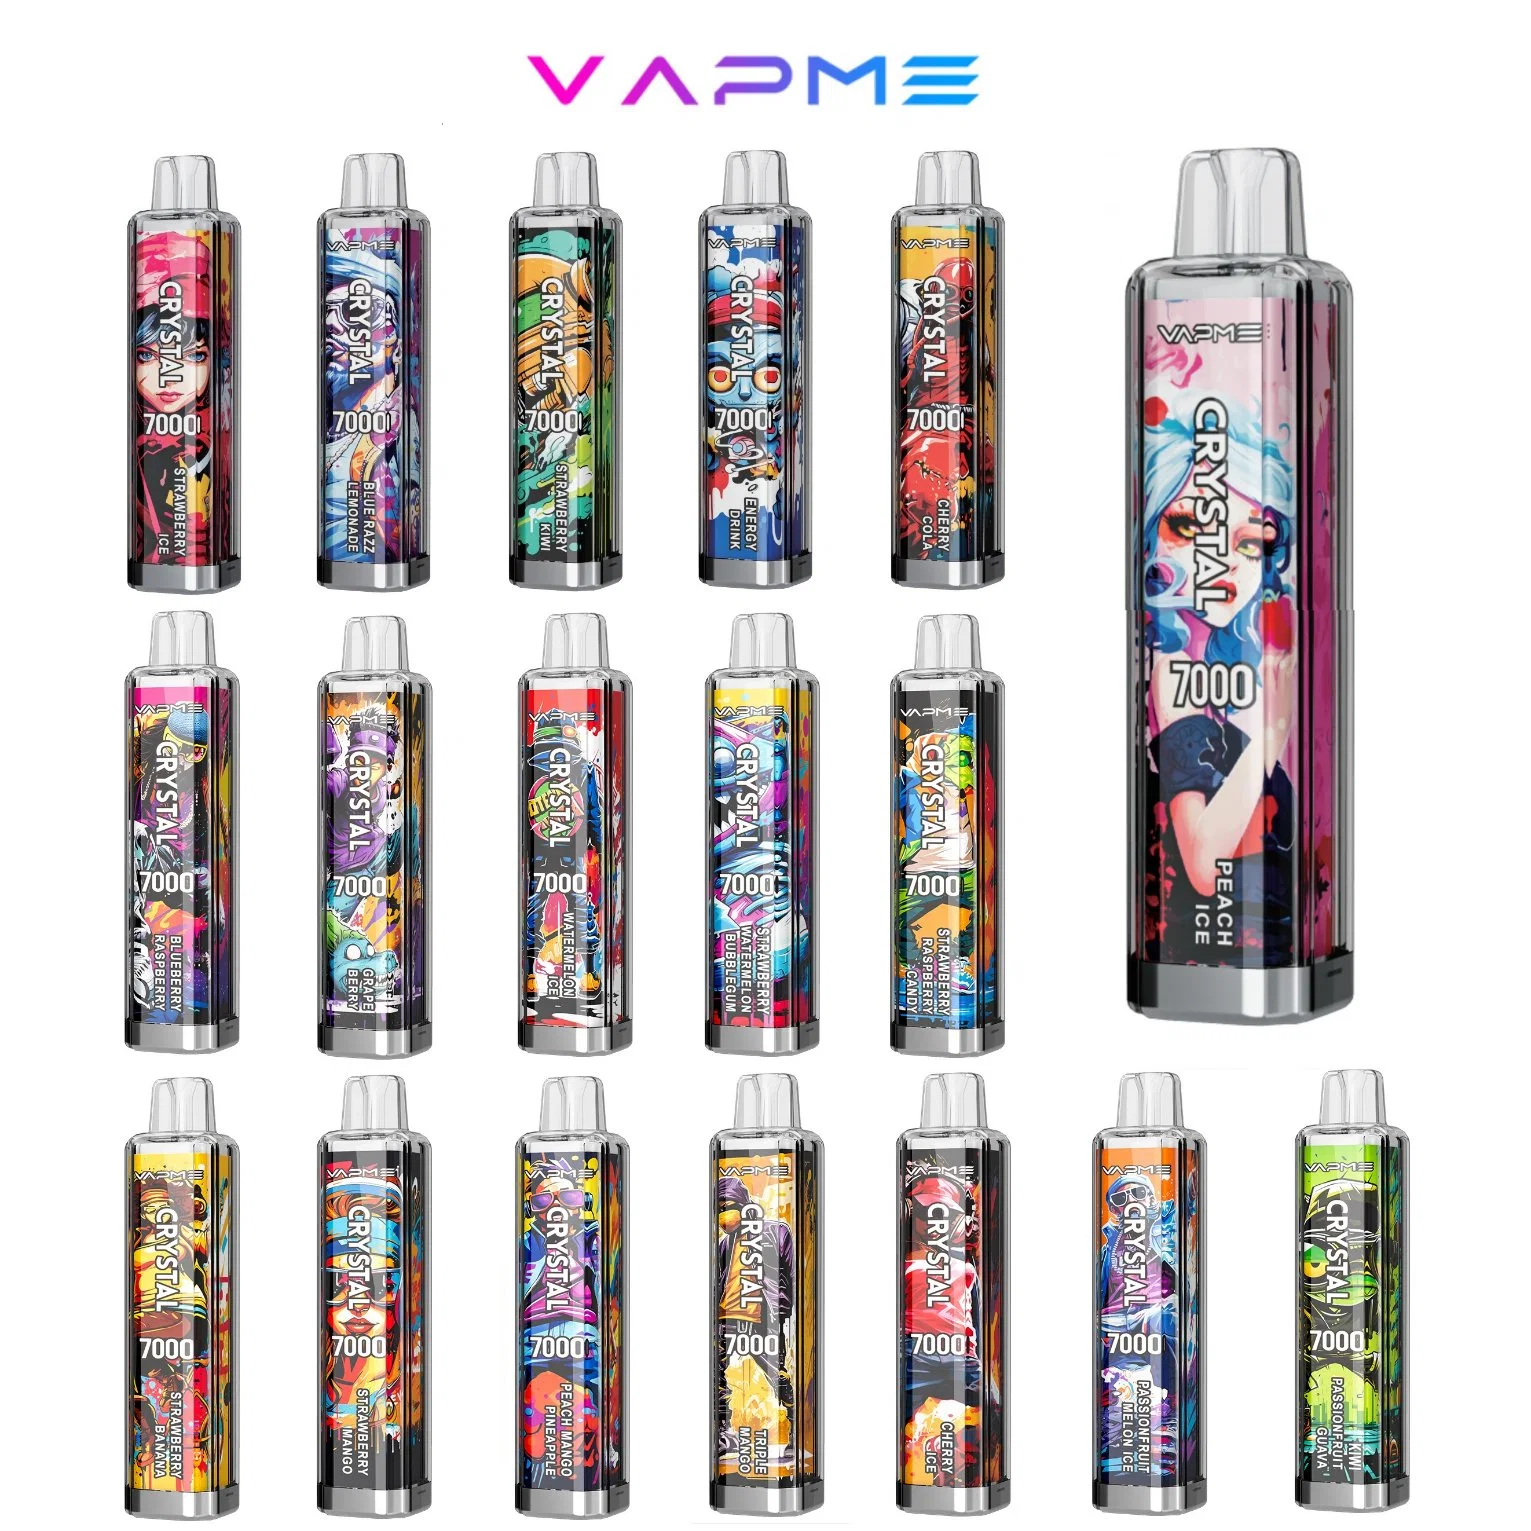 Original Vapme Crystal 7000 Puffs E-Cig Disposable/Chargeable Vape 650mAh Battery 14ml Pre-Filled 0% 2% 3% 5% Nicotine 18 Flavors OEM ODM